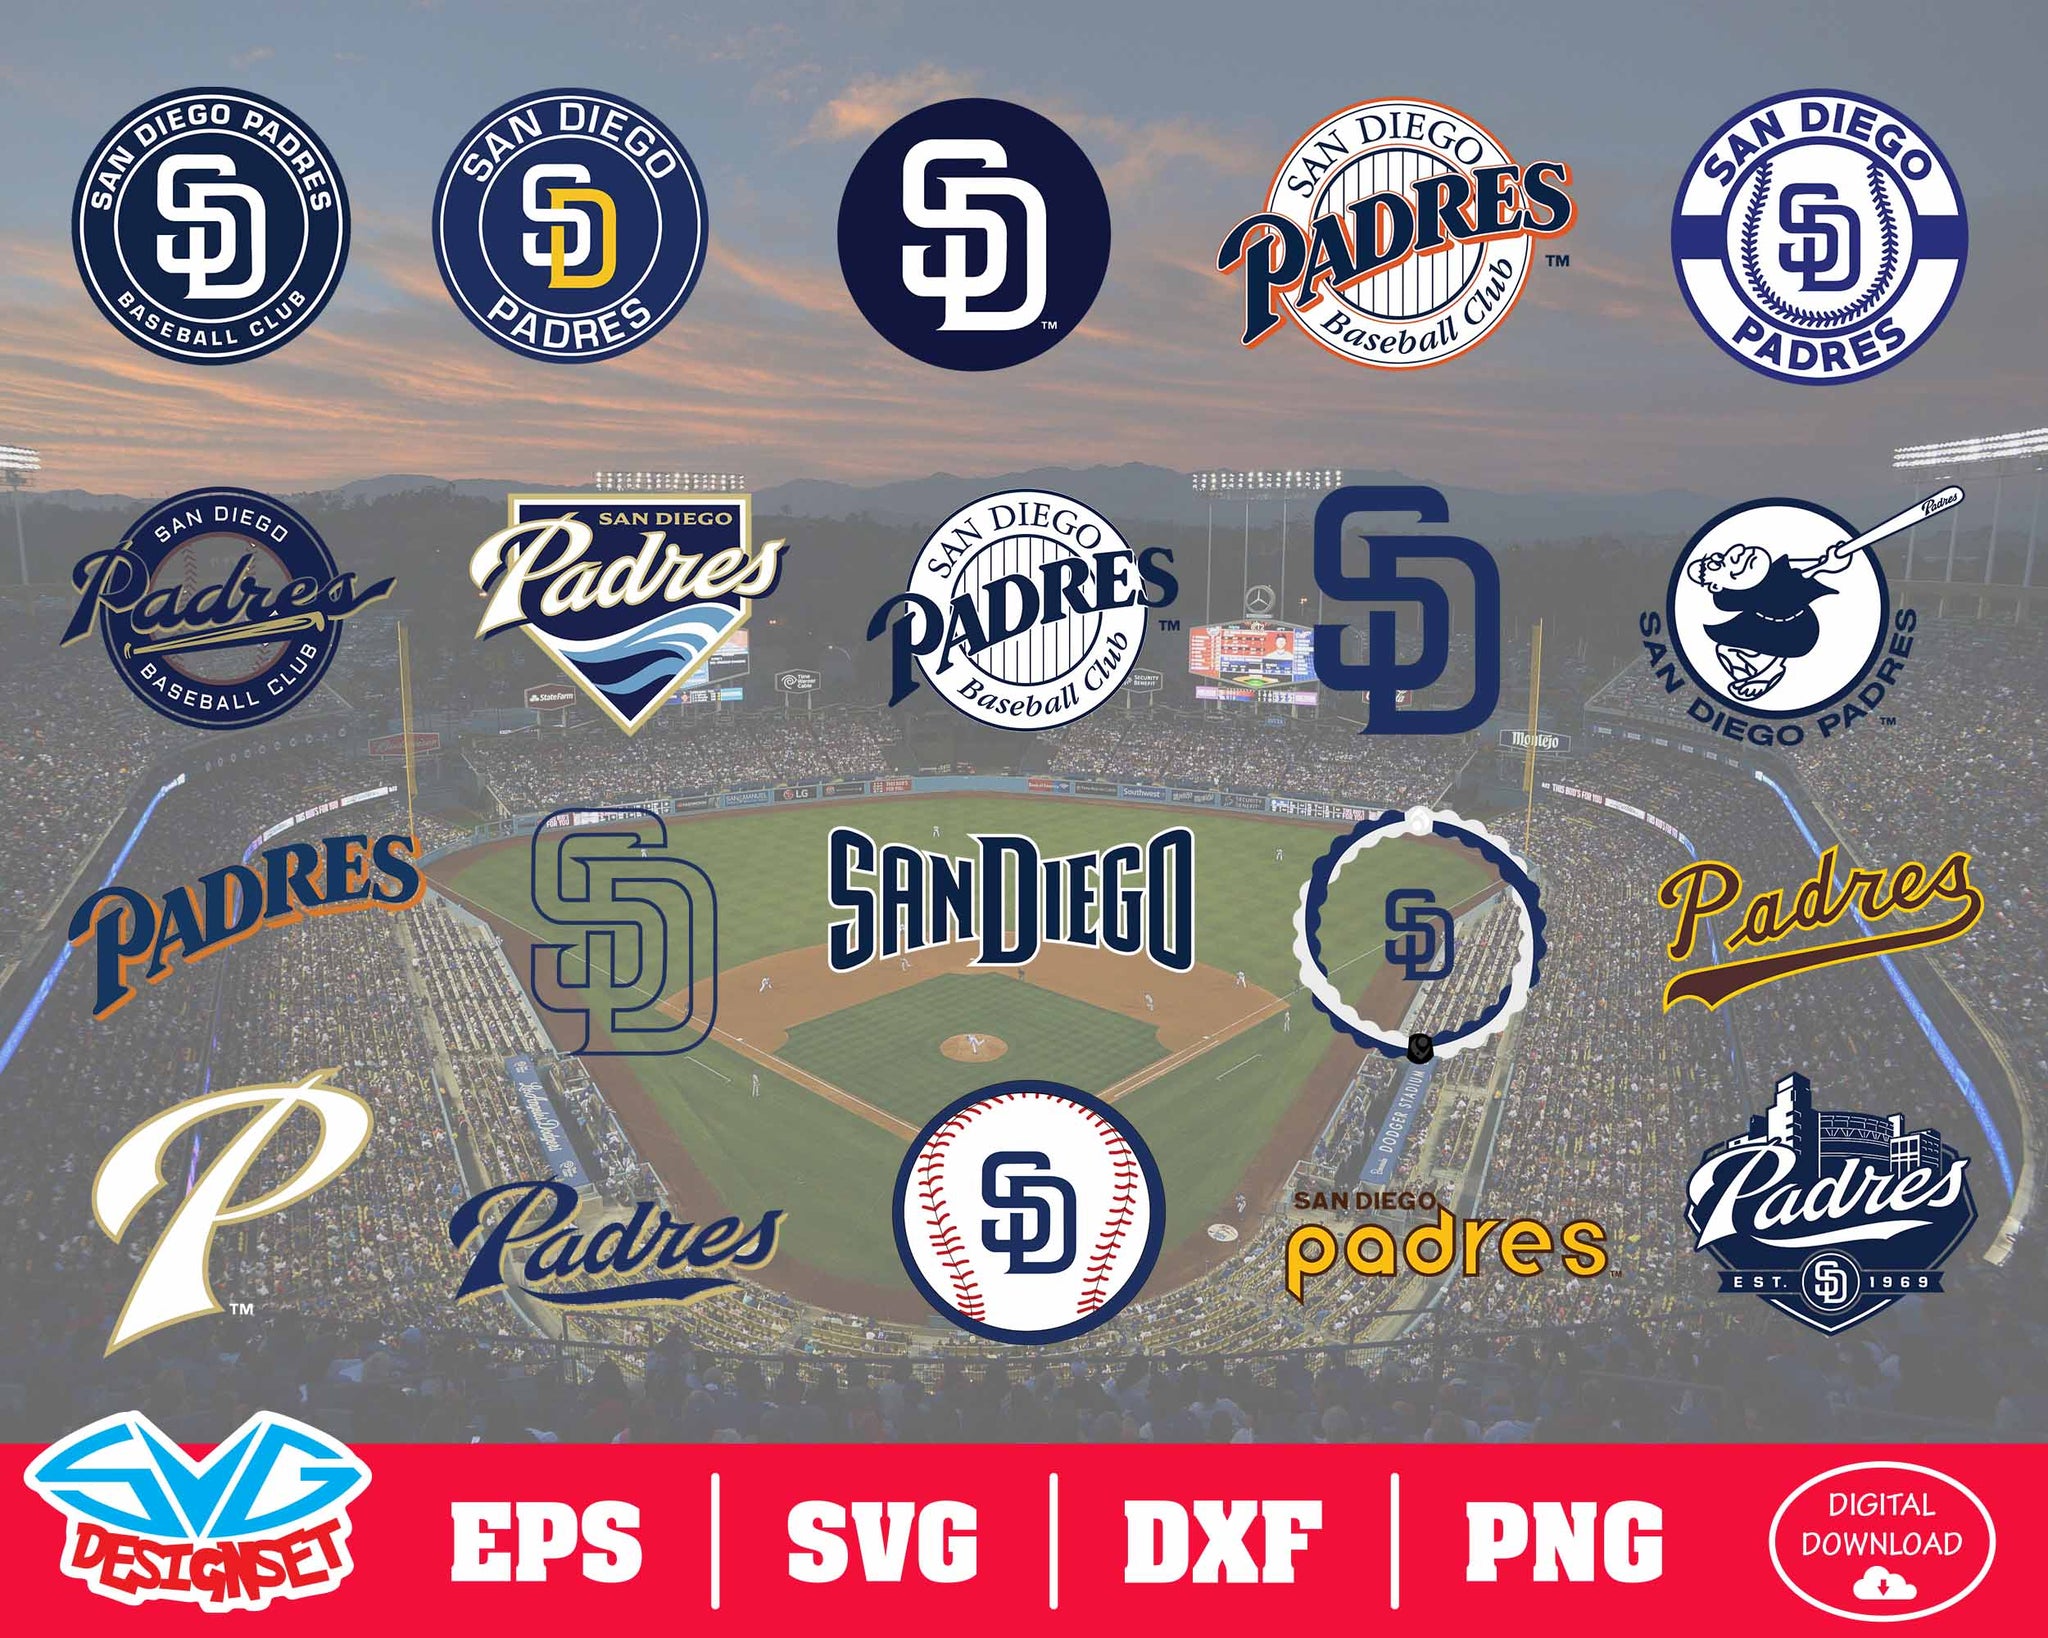 San Diego Padres Team Svg, Dxf, Eps, Png, Clipart, Silhouette and Cutfiles - SVGDesignSets